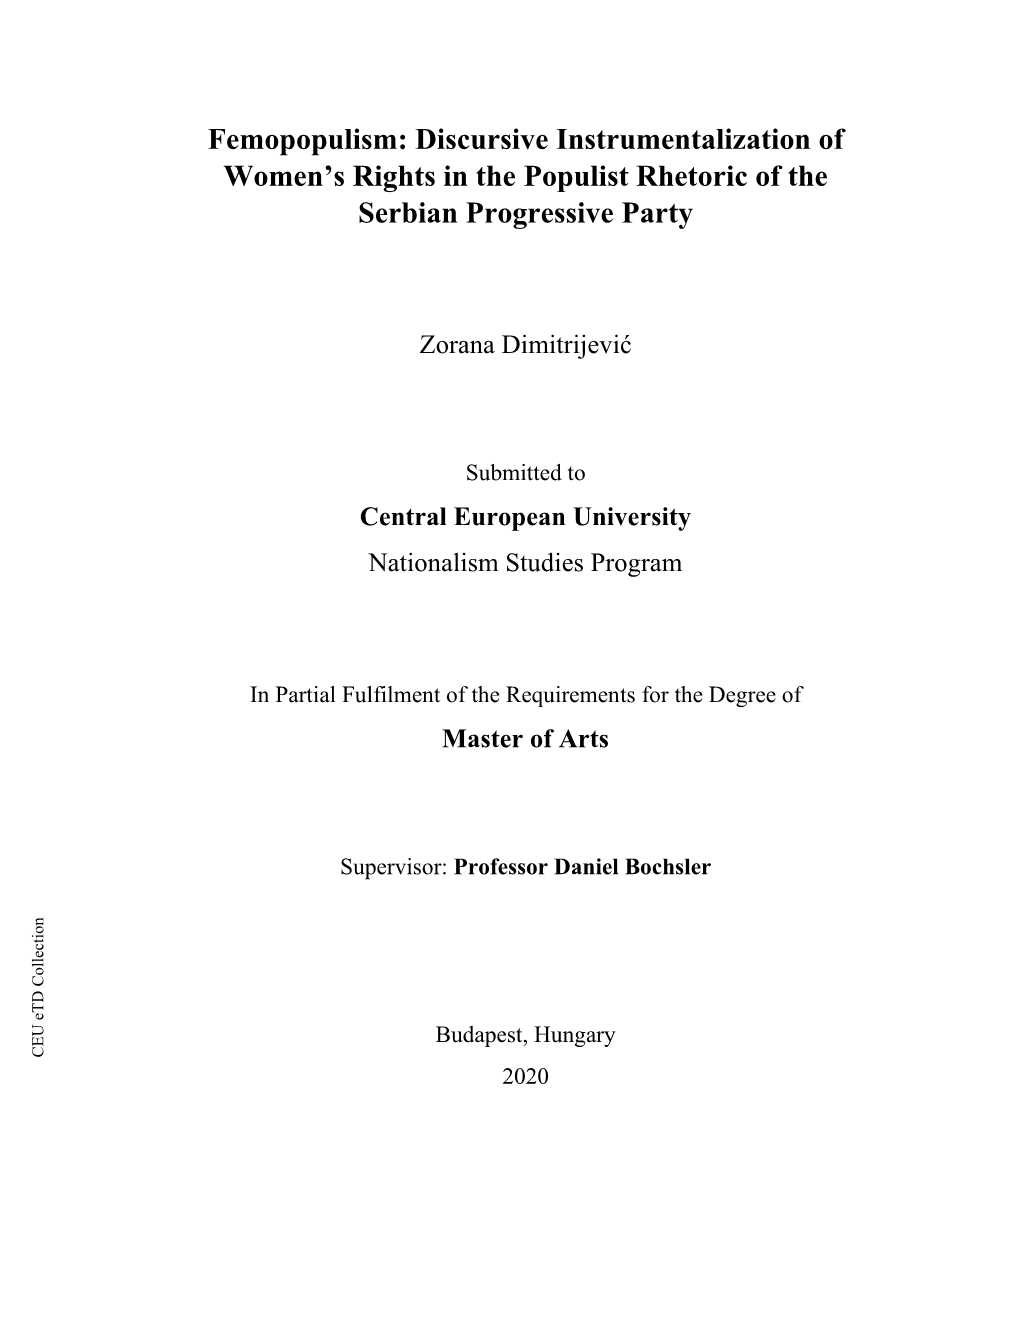 Discursive Instrumentalization of Women's Rights in the Populist